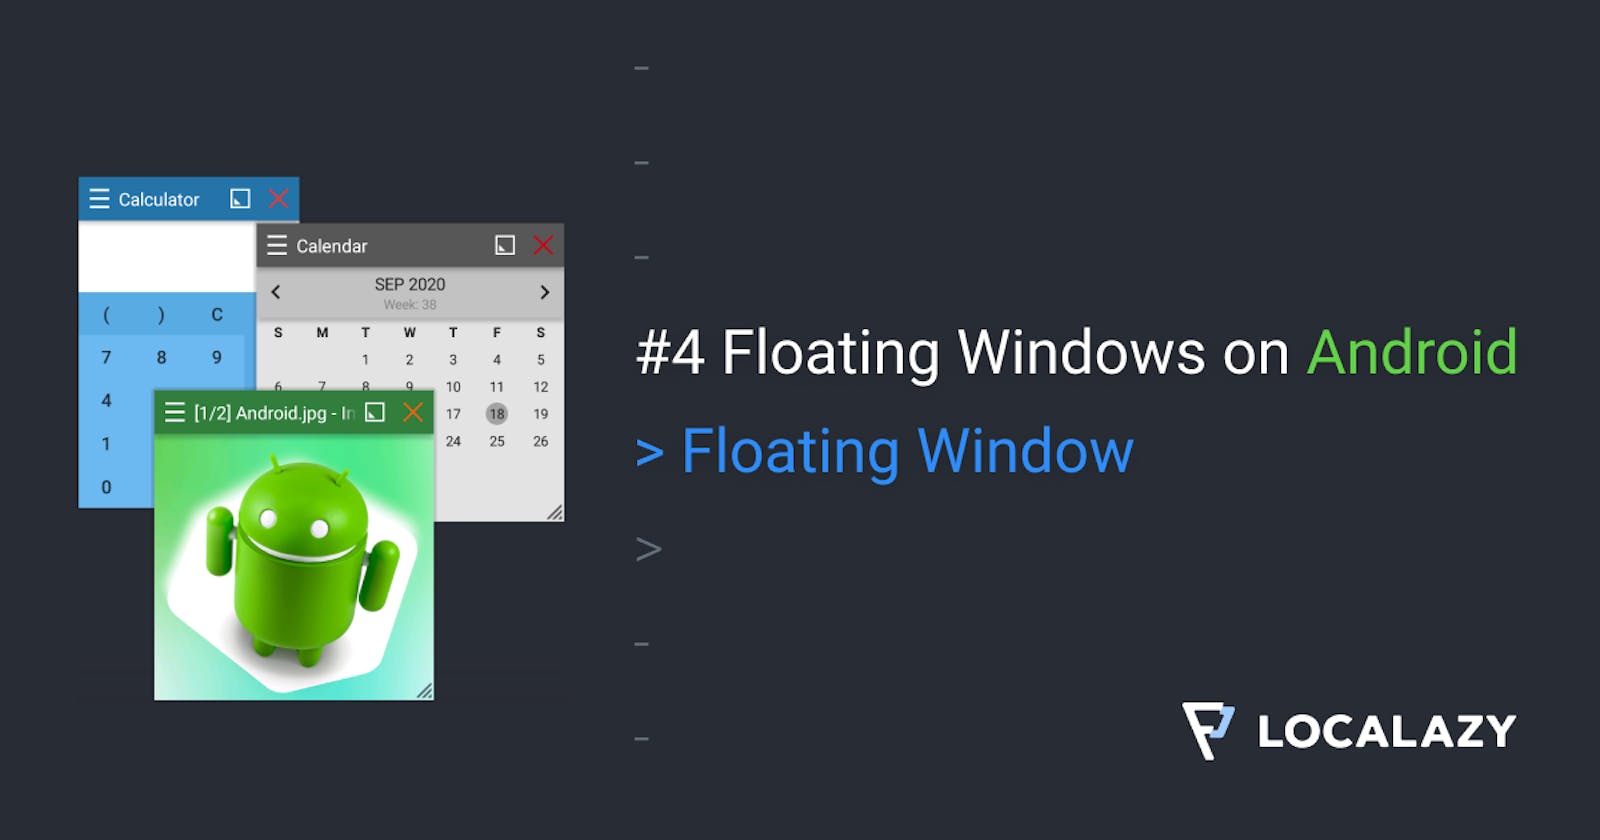 #4 Show windows floating over other apps on Android